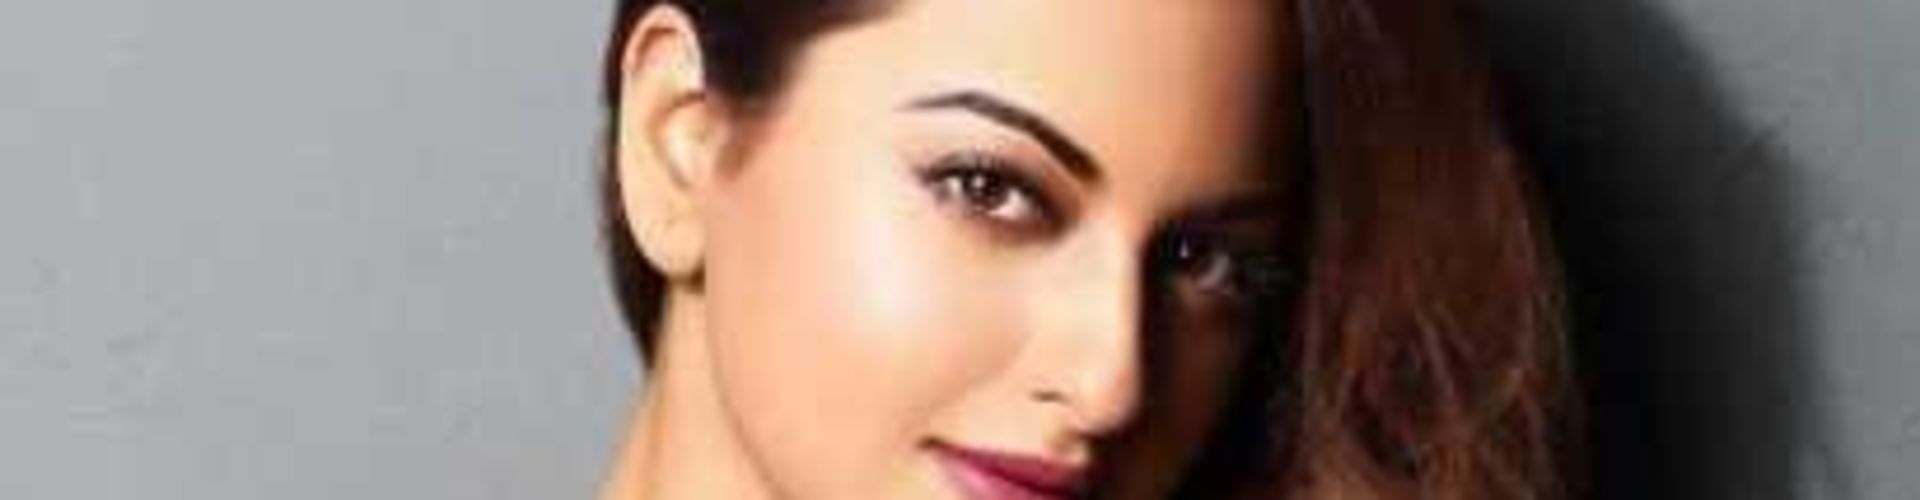 Should Punish the Man, Who has Wronged Woman Says Sonakshi Sinha